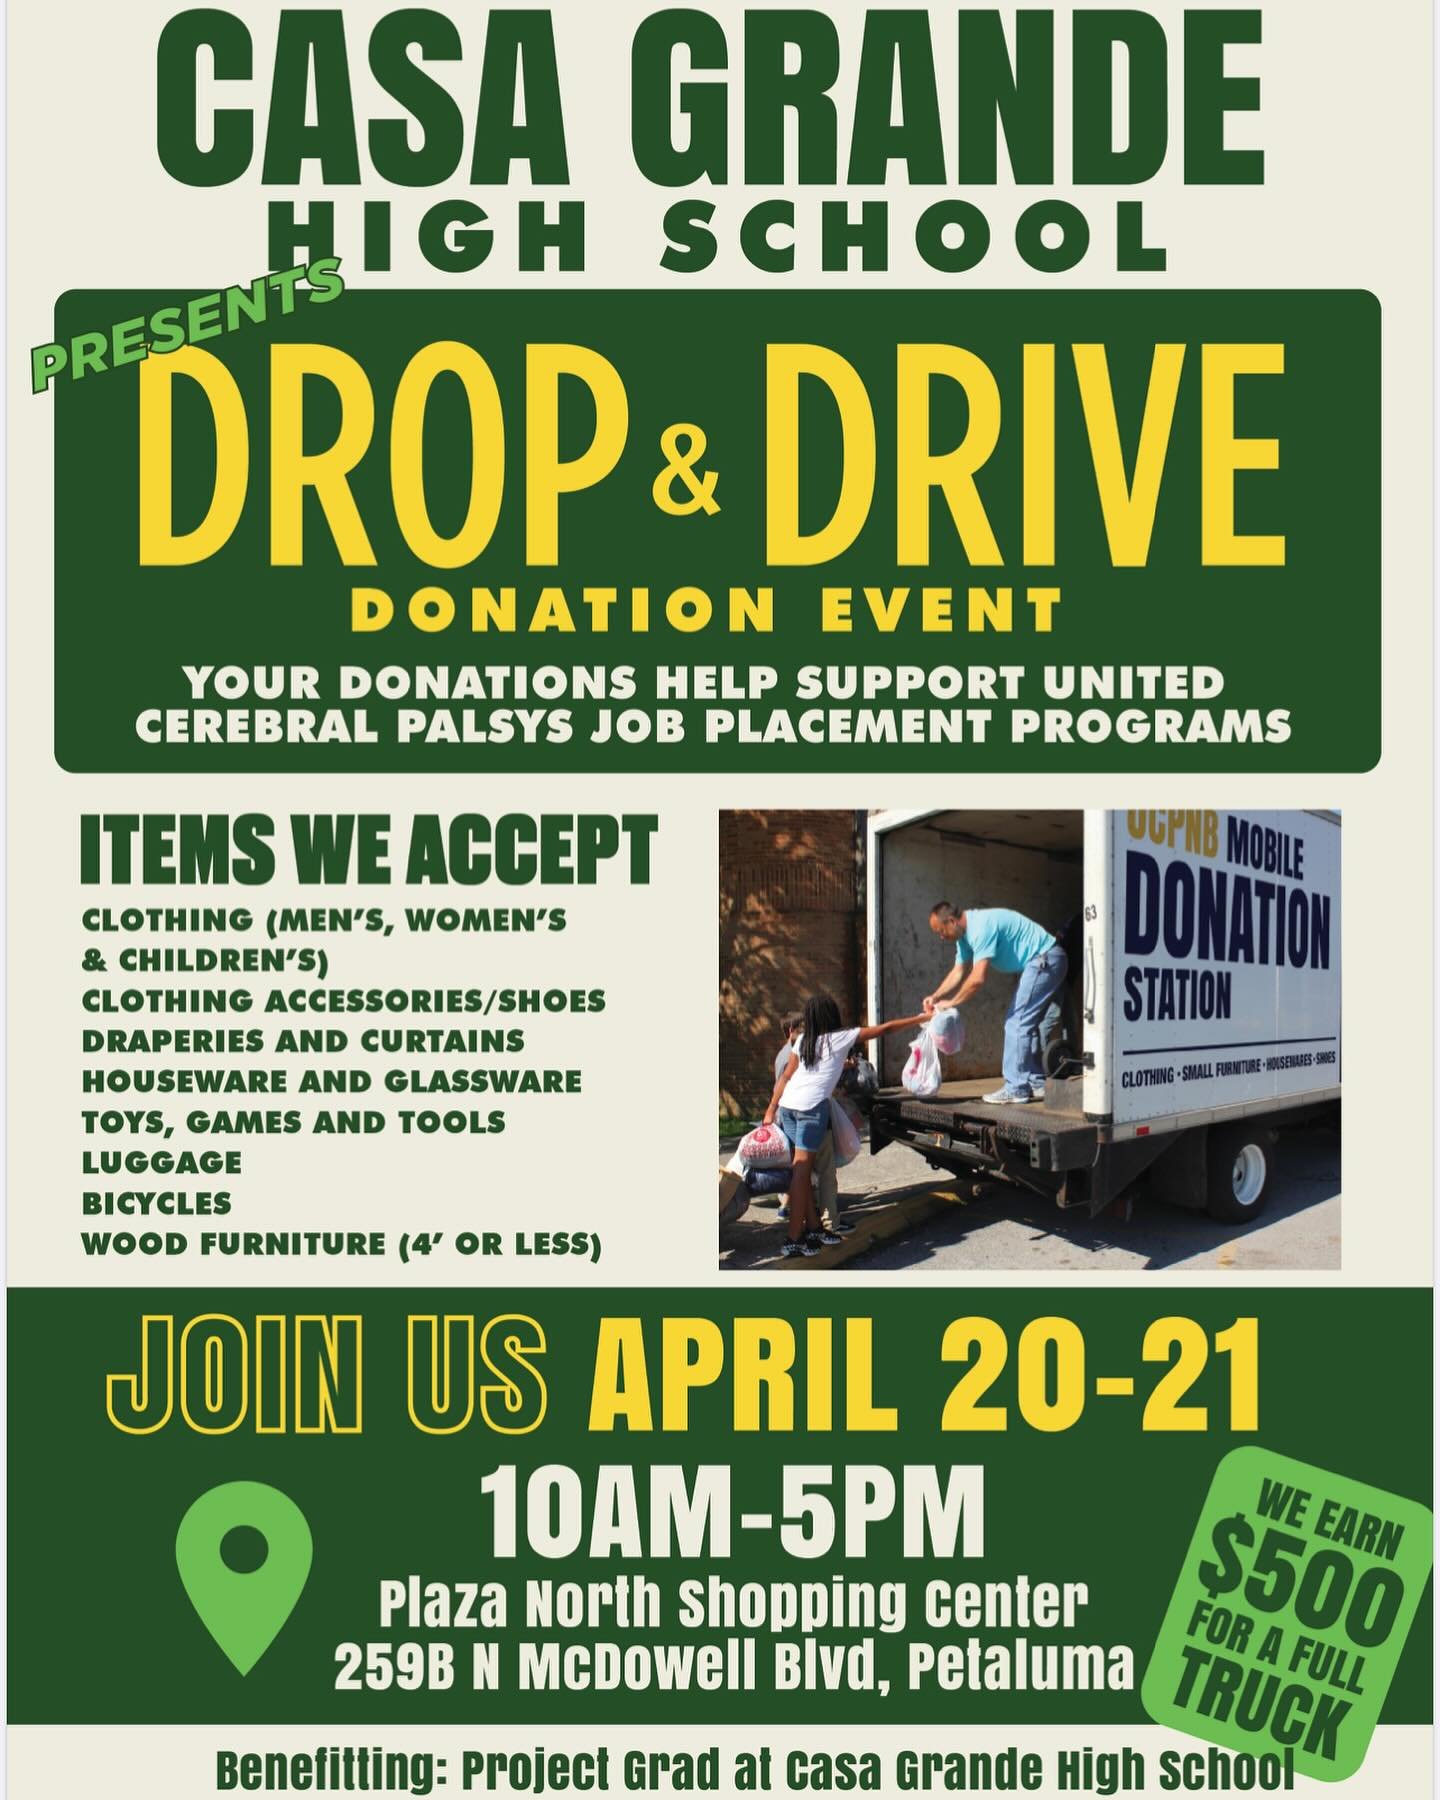 Join Casa Grande High School this weekend for a Donation Drive at Plaza North Shopping Center, 259 N McDowell Blvd, Petaluma! 🌟 Your support benefits their Project Grad. Let&rsquo;s come together and make an impact! #casagrande #projectgrad